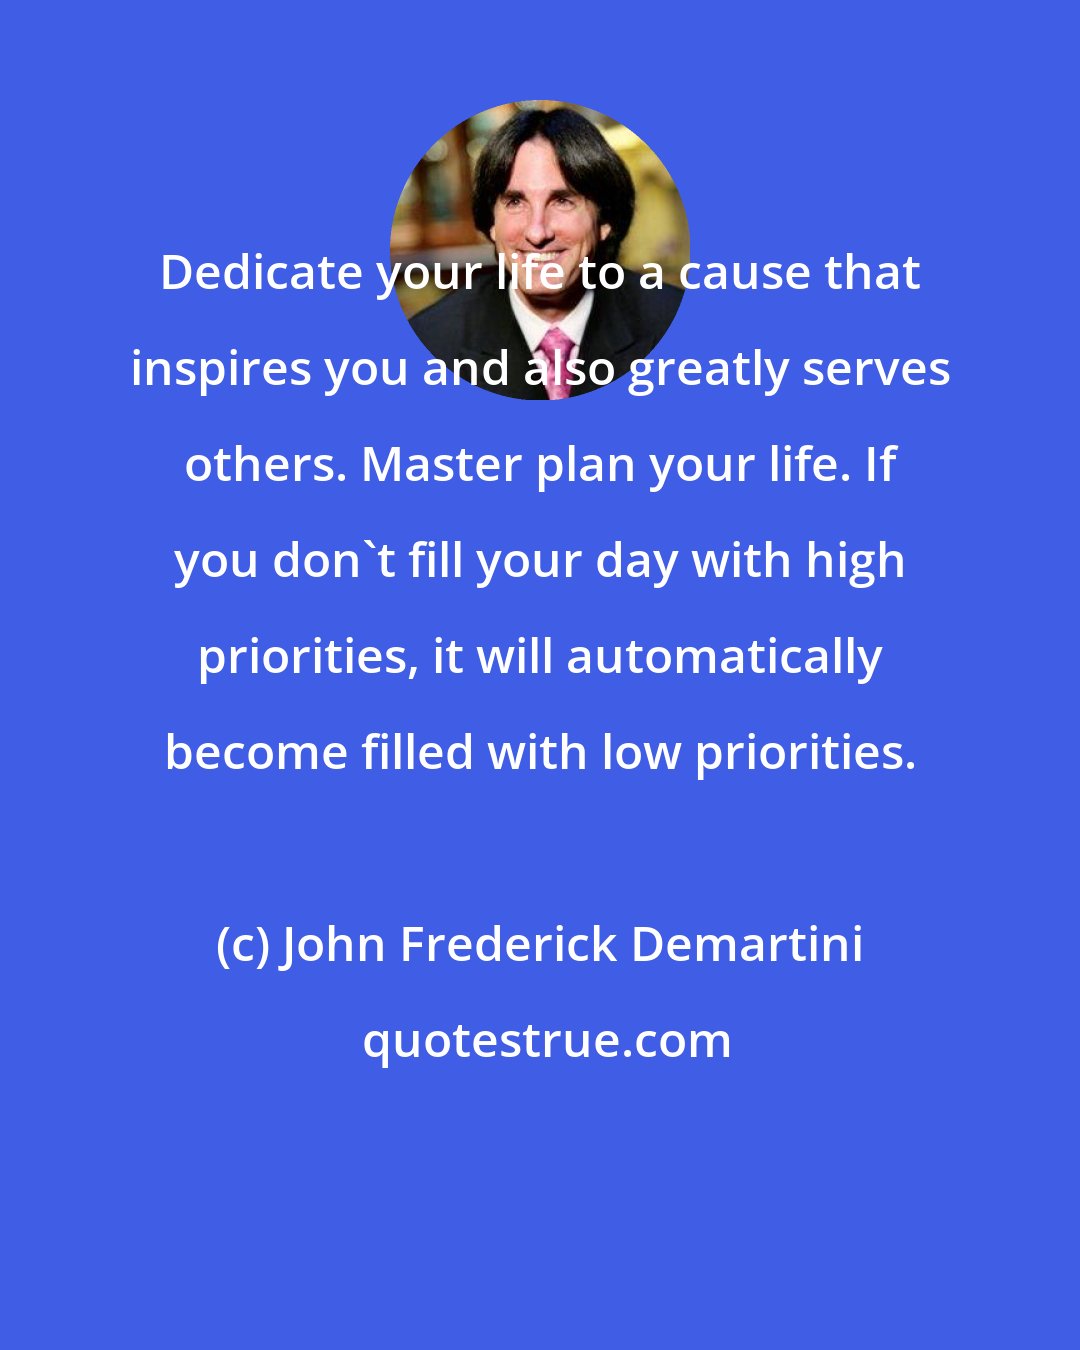 John Frederick Demartini: Dedicate your life to a cause that inspires you and also greatly serves others. Master plan your life. If you don't fill your day with high priorities, it will automatically become filled with low priorities.